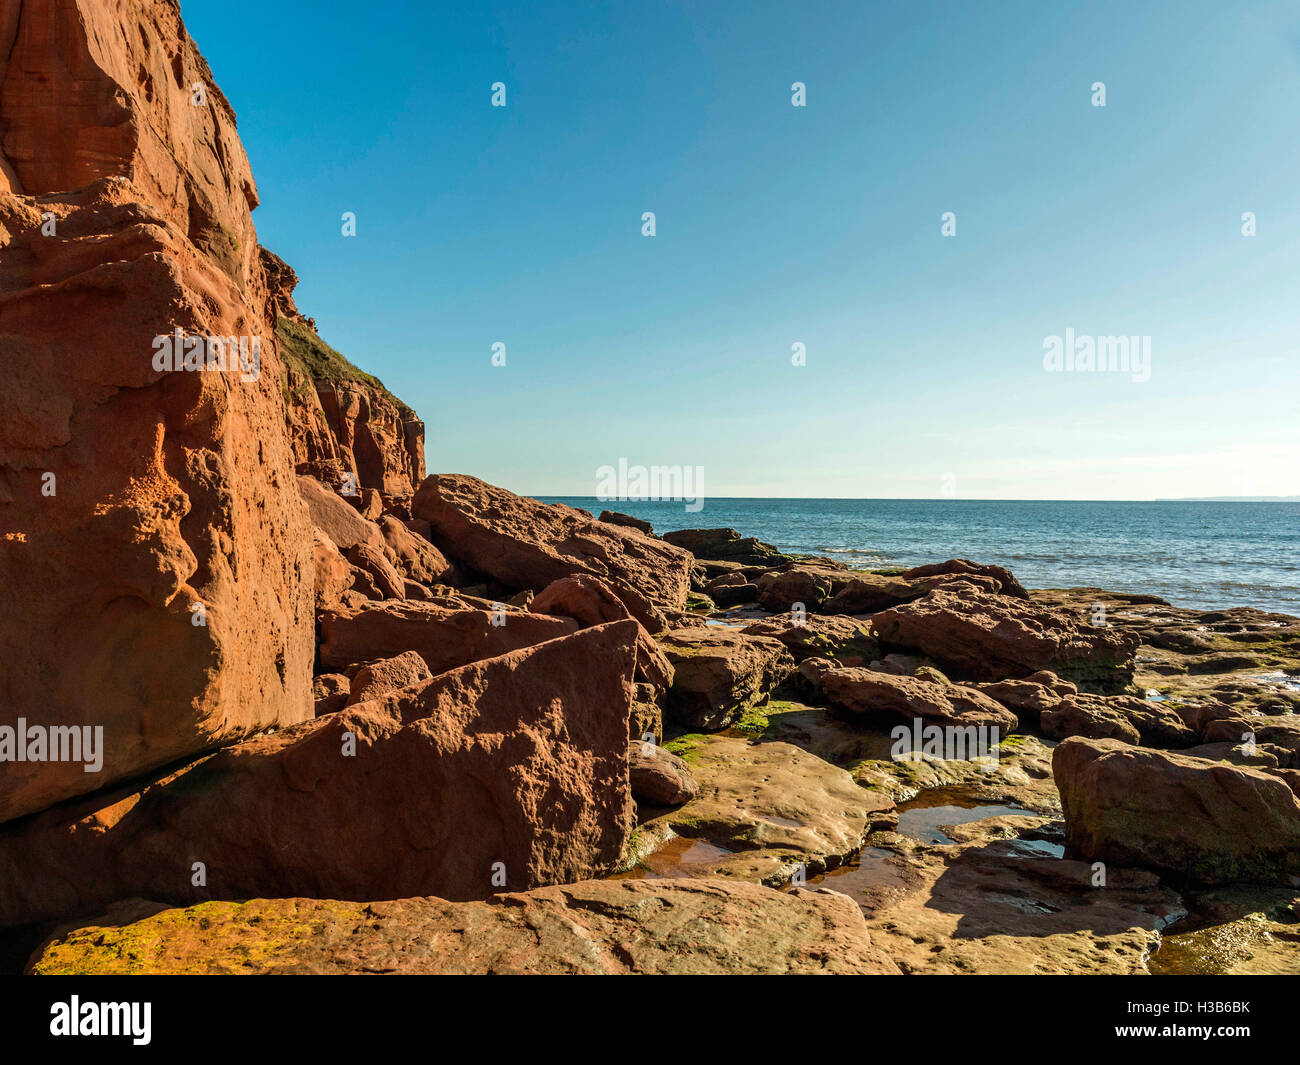 Beautiful rustic rock formation at low tide along the Jurassic Coast between the seaside town of Exmouth and Sandy Bay, Devon. Stock Photo